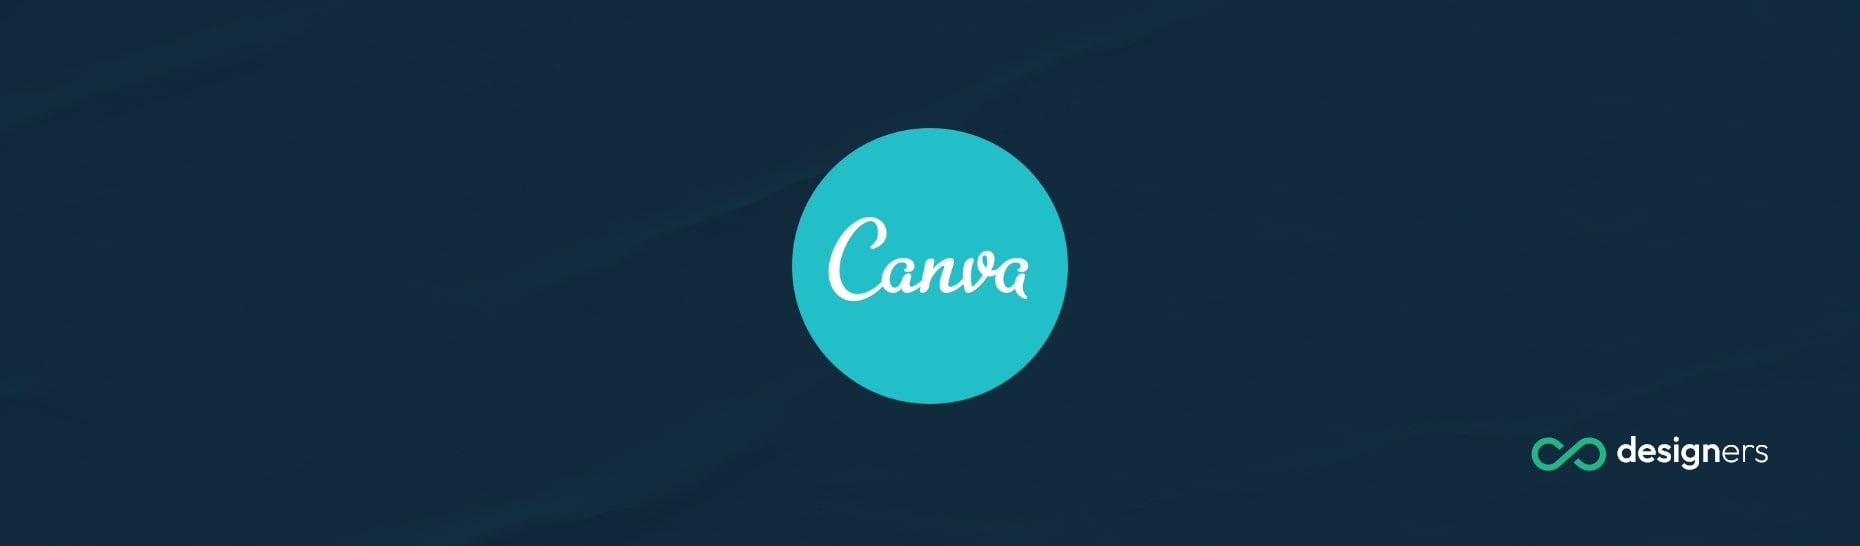 How to do gradient text in Canva for free?